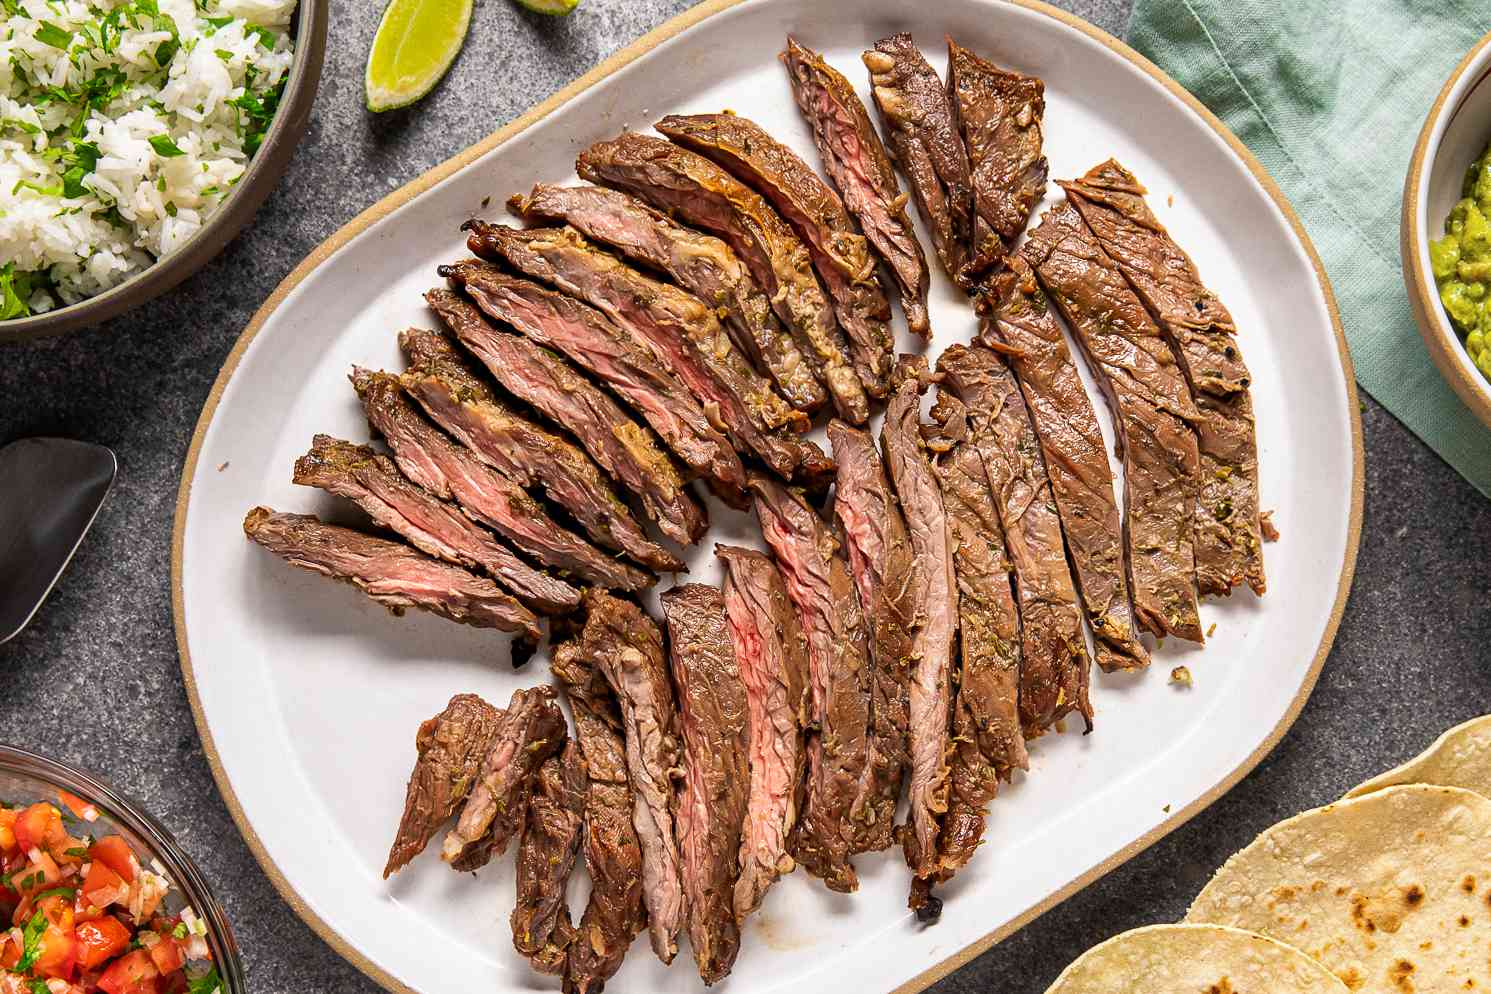 Arrachera (Mexican Skirt Steak) on a Platter Next to a Bowl of Salsa, a Bowl of Cilantro Rice, a Bowl of Guacamole, a Platter of Tortillas, and Lime Wedges and a Light Teal Kitchen Towel on the Counter